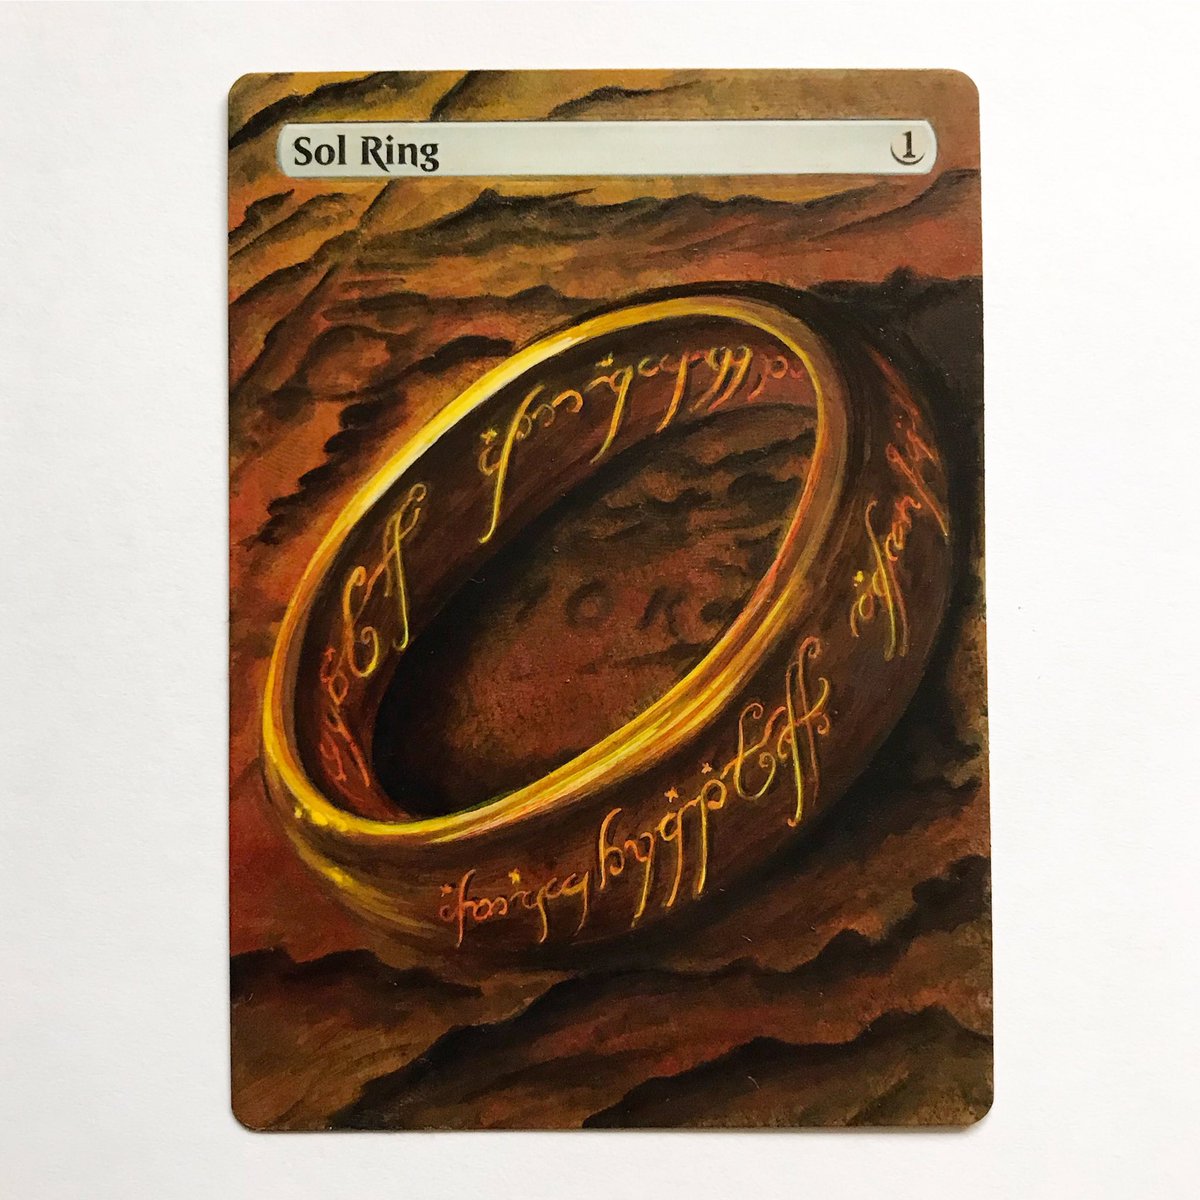 The finished Sol Ring did most of it on the Saturday stream. #mtg #mtgalter...